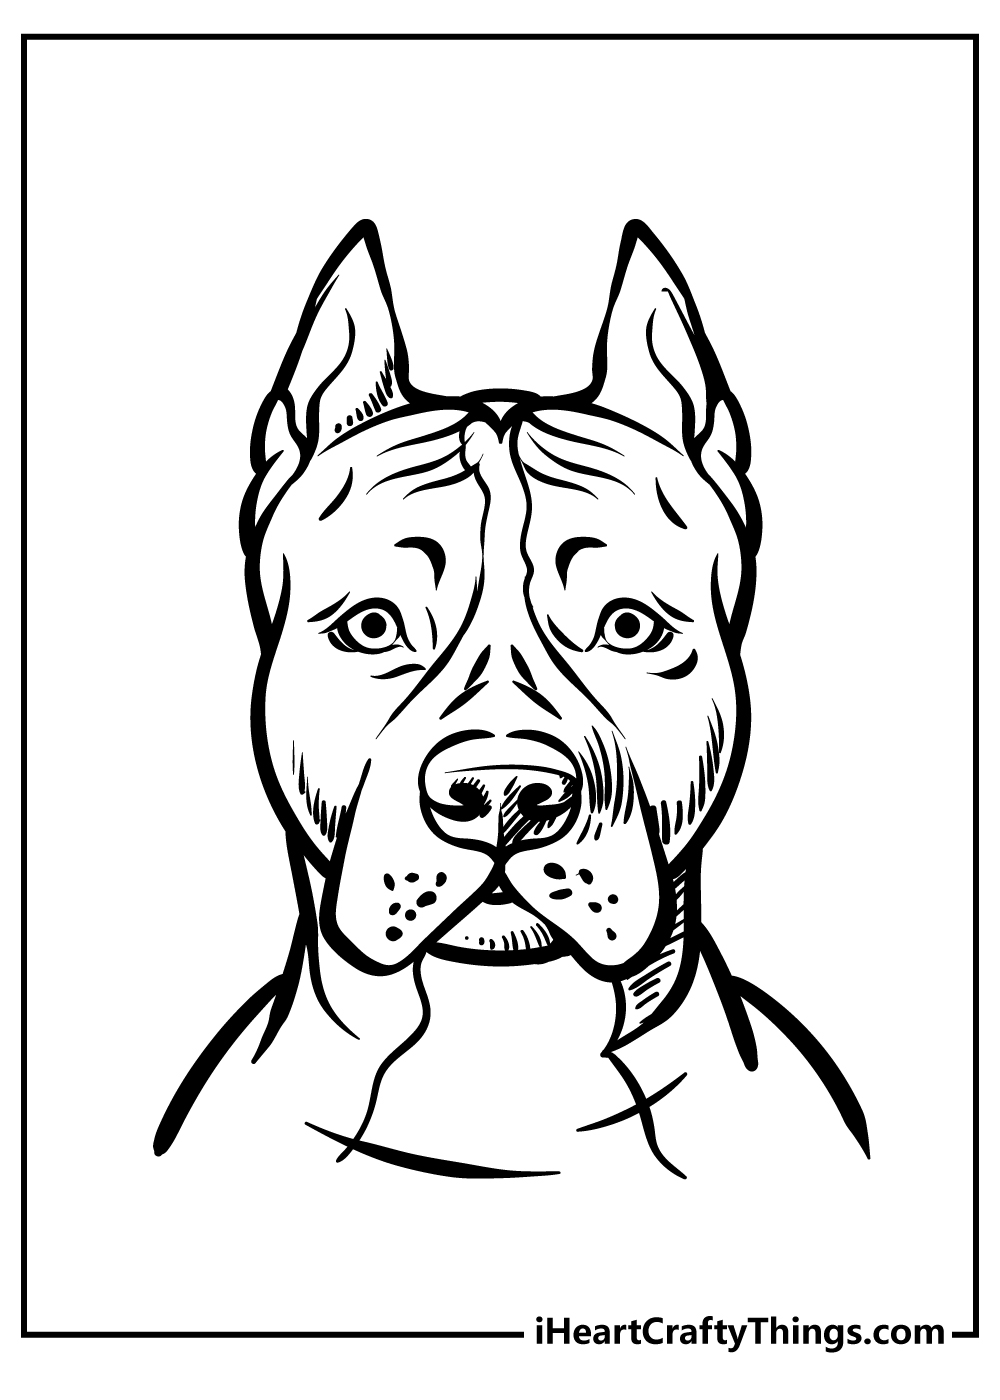 Pitbull Coloring Book for adults free download